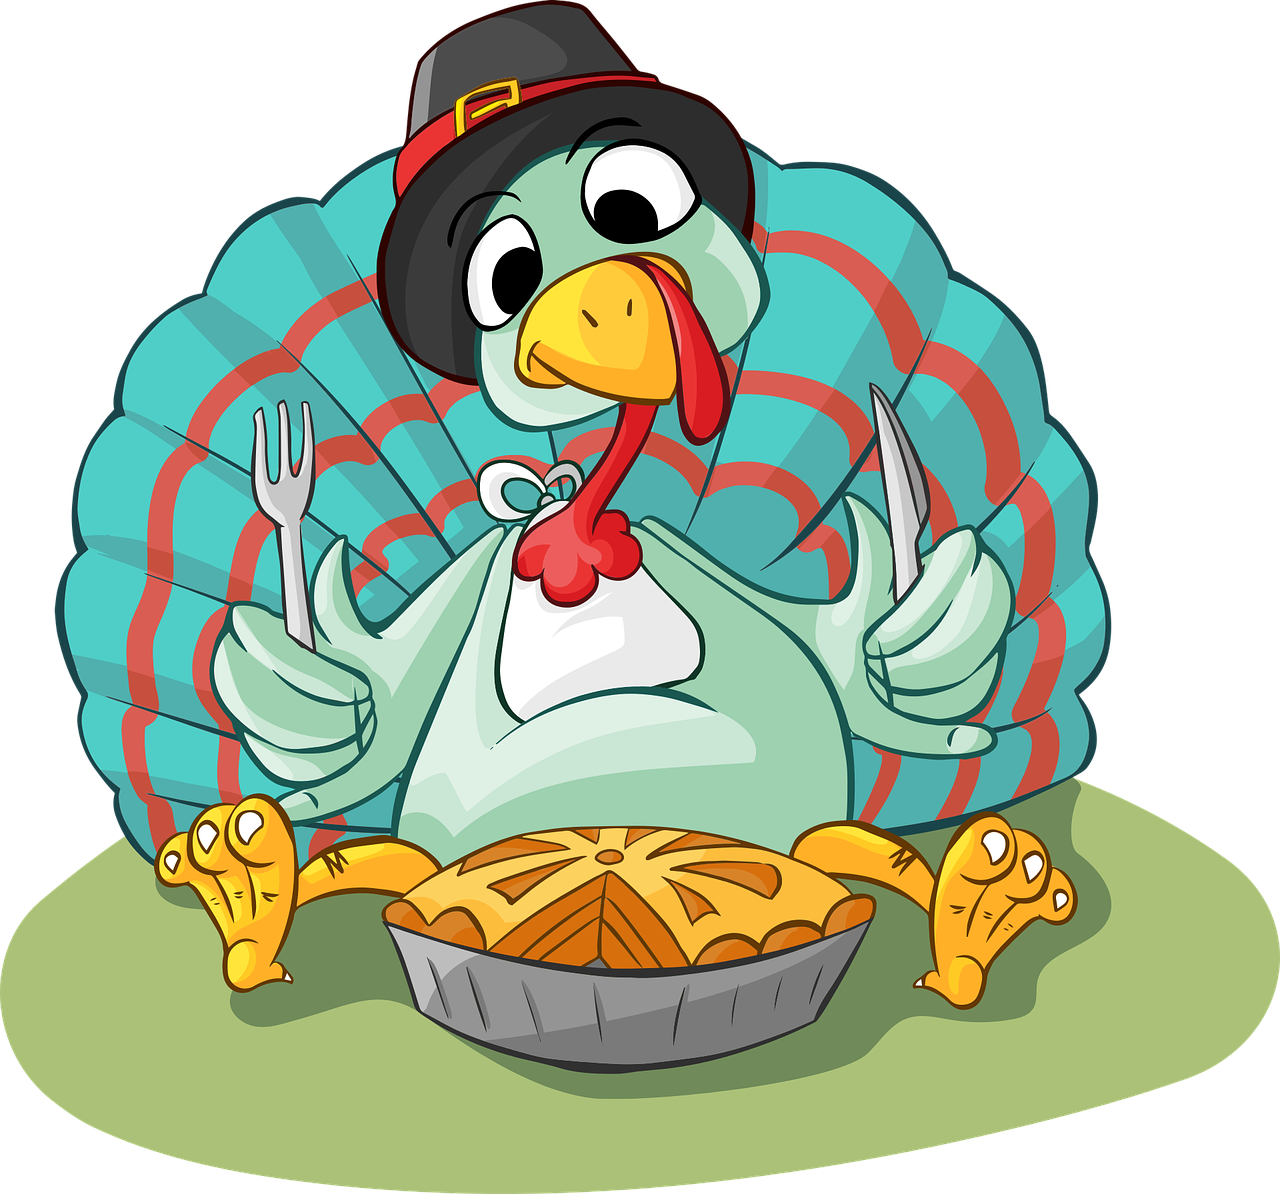 Cartoon of a turkey in a pilgrim hat eating a pumpkin pie. Everything about this sums up what troubles me about American Thanksgiving.